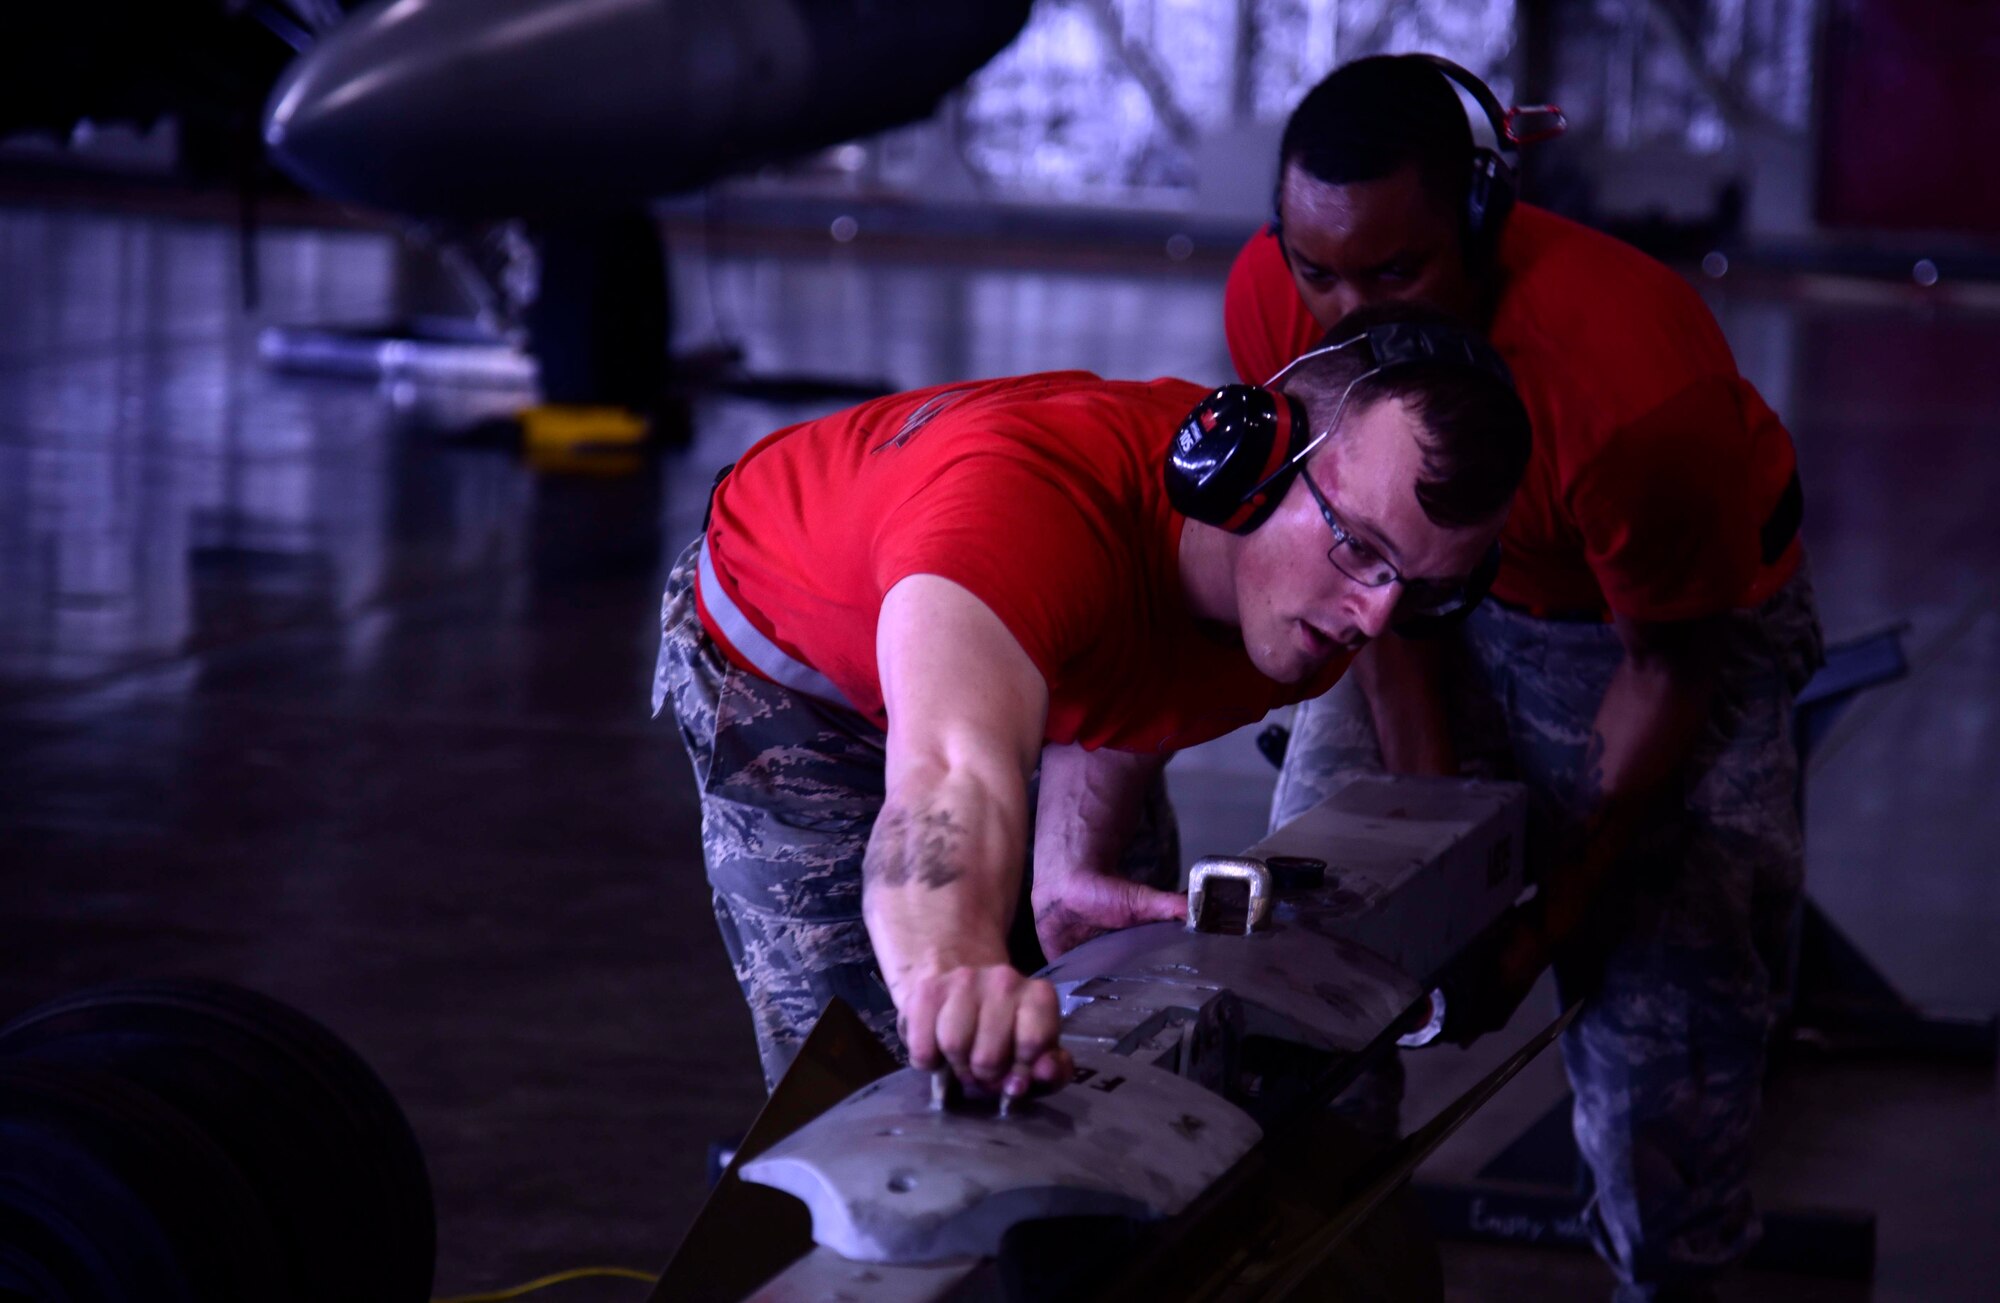 U.S. Air Force Senior Airman Kyle Faragher and Staff Sgt. Michael Barnes, 35th Aircraft Maintenance Squadron load crew members, compete in the third quarter load crew competition at Misawa Air Base, Japan, July 17, 2015. The competition evaluated the load crew team’s overall loading ability, which includes quality of work and finishing time. (U.S. Air Force photo by Airman 1st Class Jordyn Fetter/Released) 